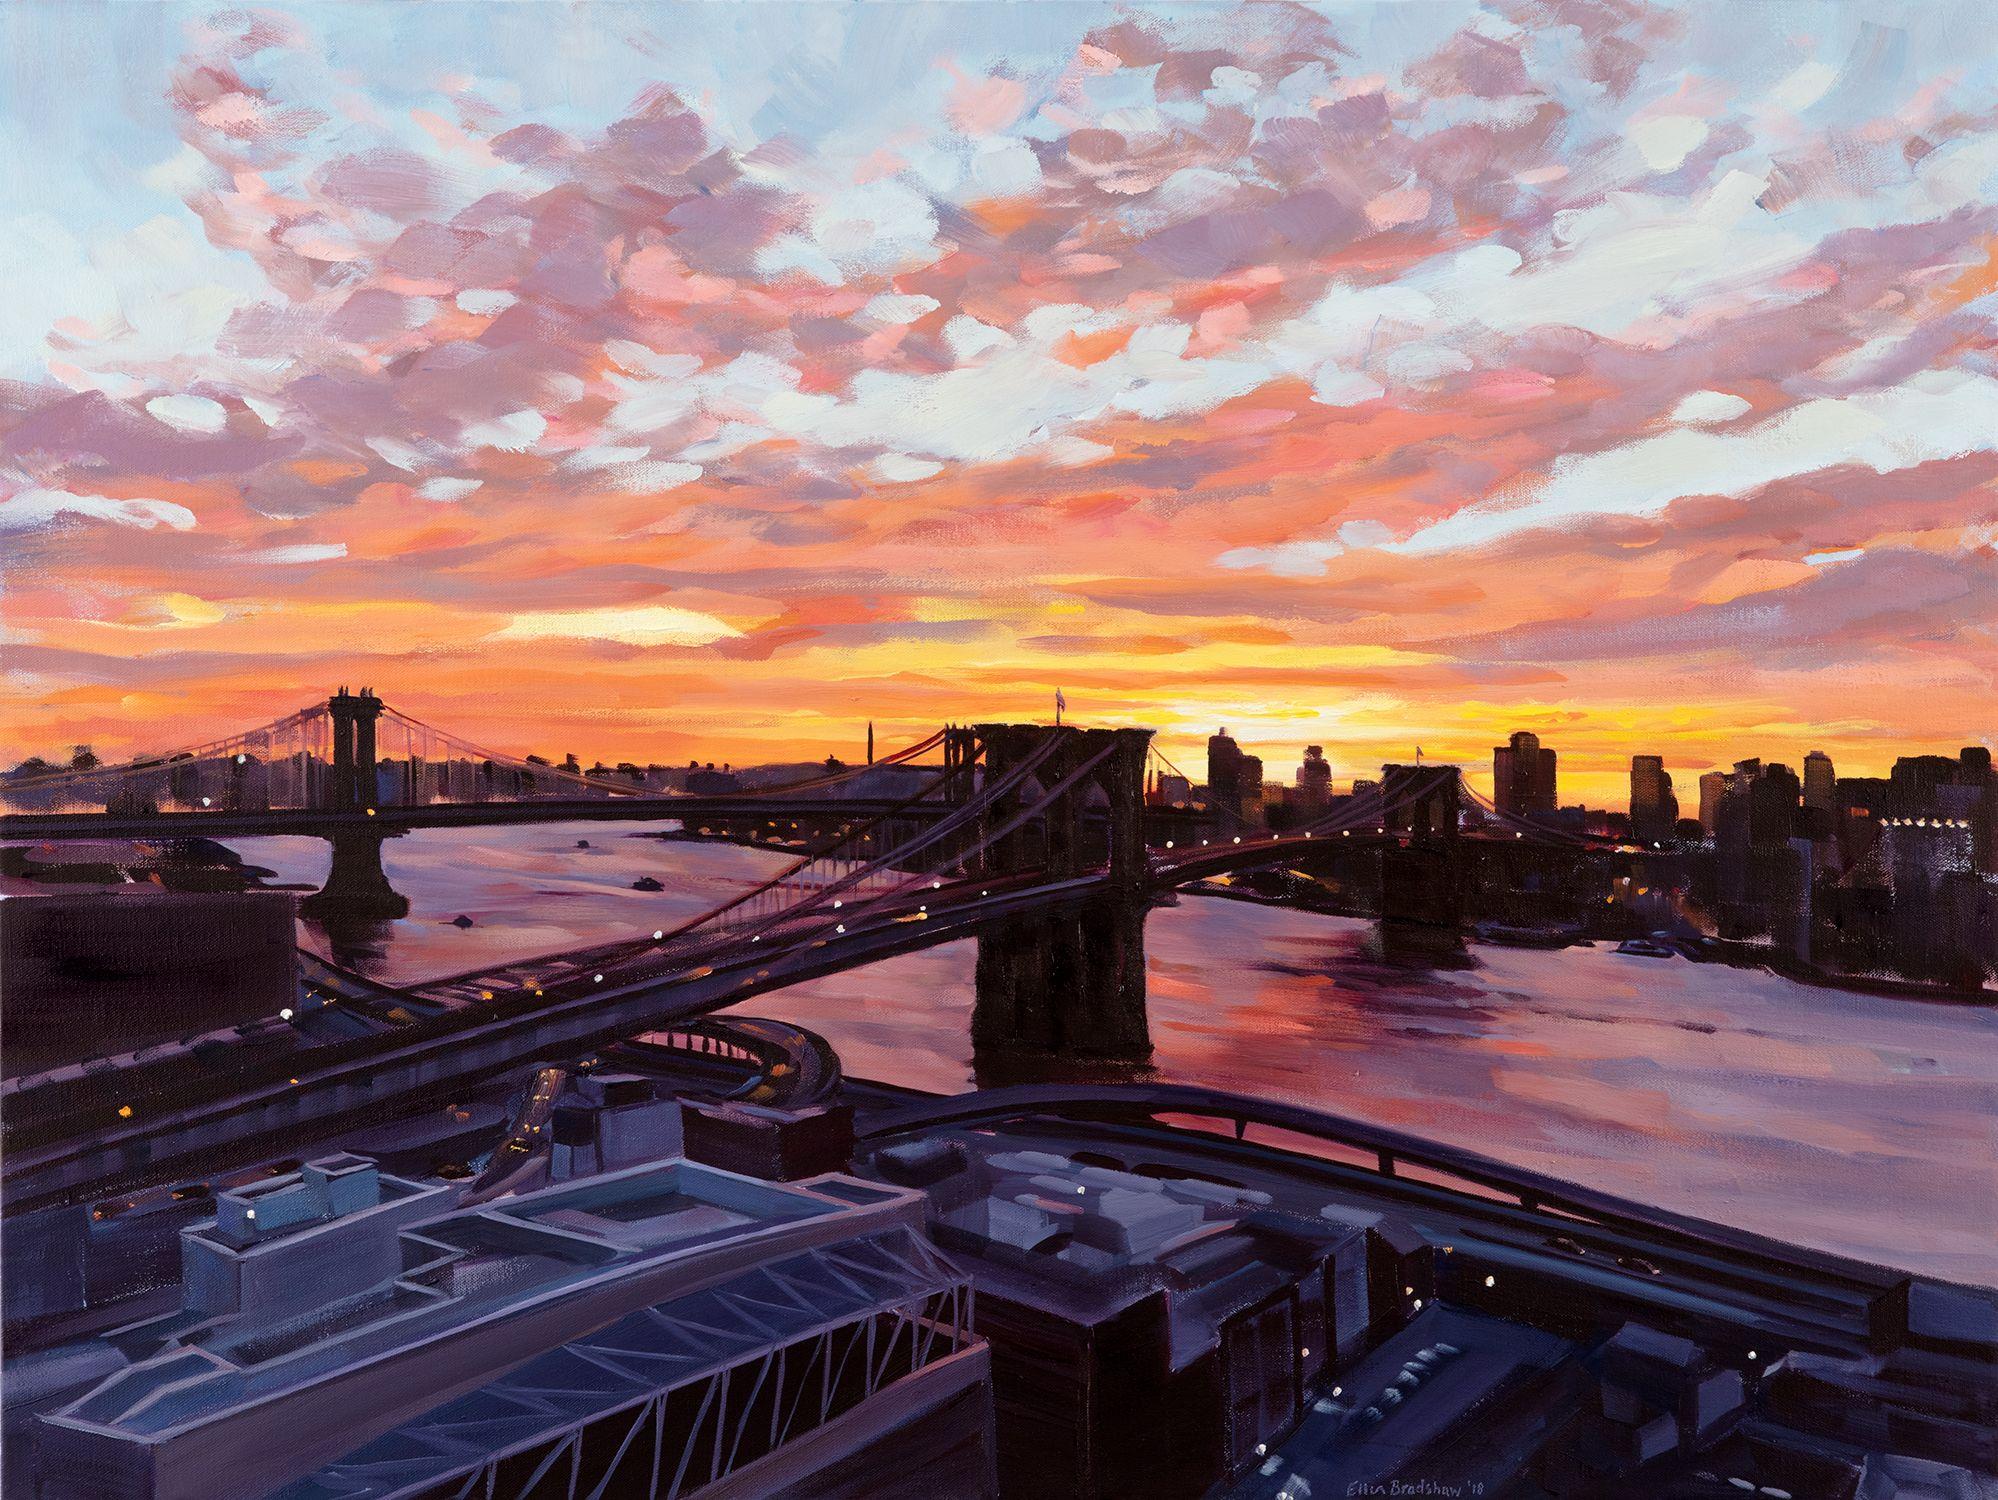 A stunning sunrise view from the artist's balcony on the 25th floor of her apartment inspired this colorful vision! Spectacular swirling clouds dance above the Brooklyn and Manhattan Bridges over the East River, lower Manhattan and the Brooklyn